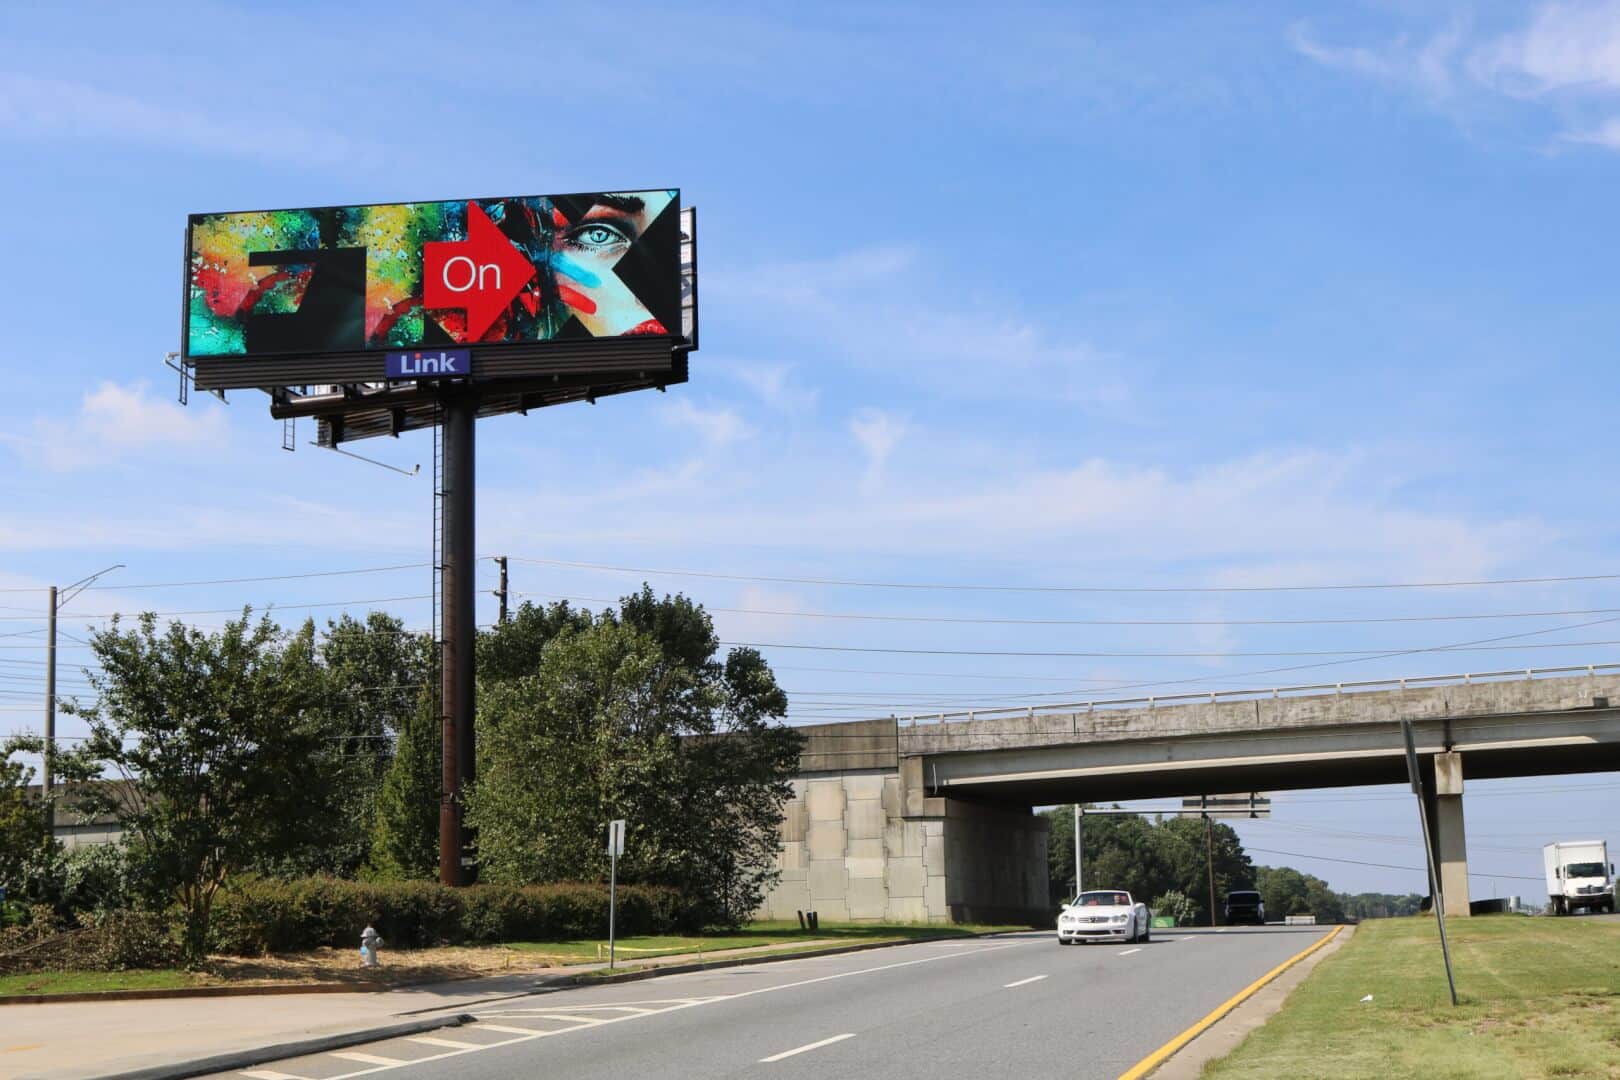 How Do You Become a Billboard Owner?